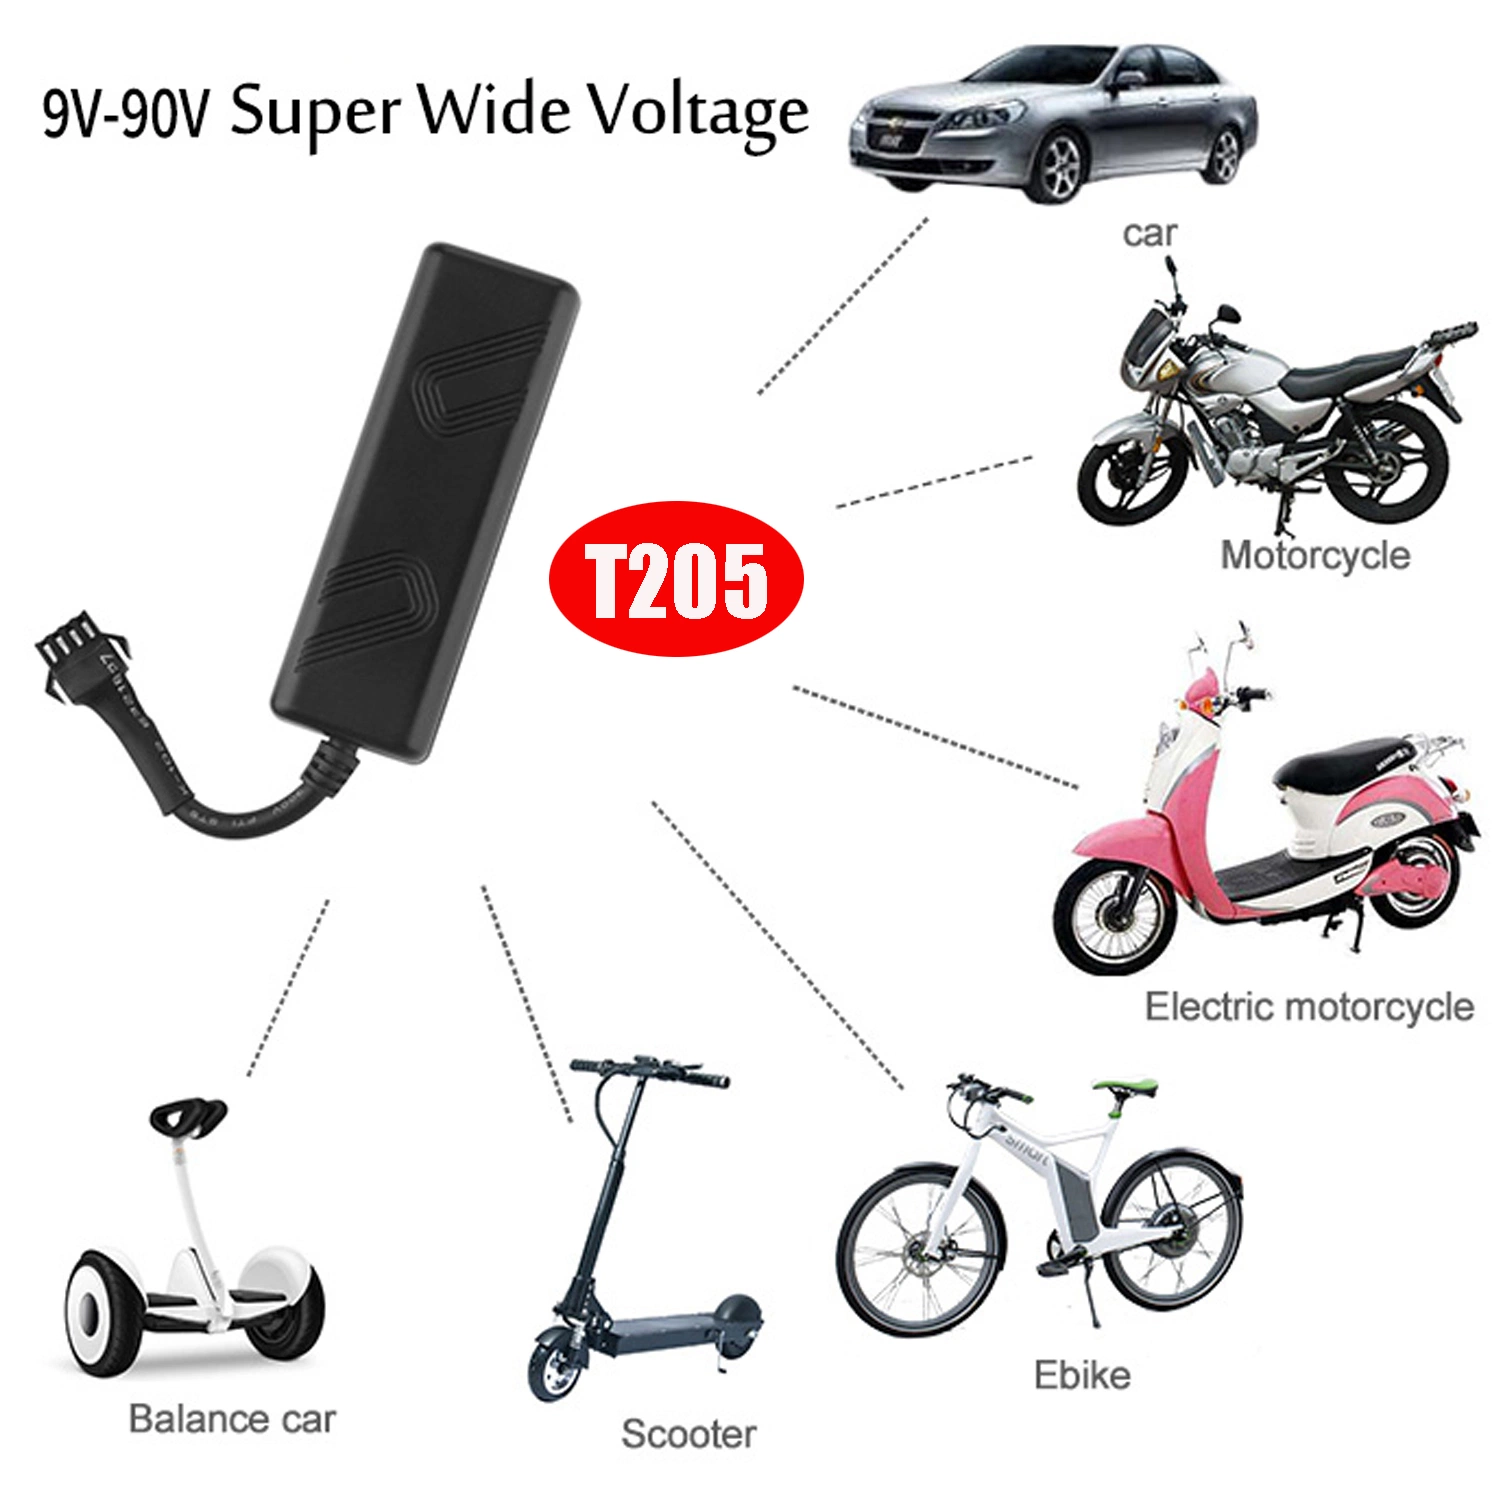 China Manufacturer Bike Auto Car Motor GSM Mini Vehicle GPS Tracker with Remote Cut off Engine T205